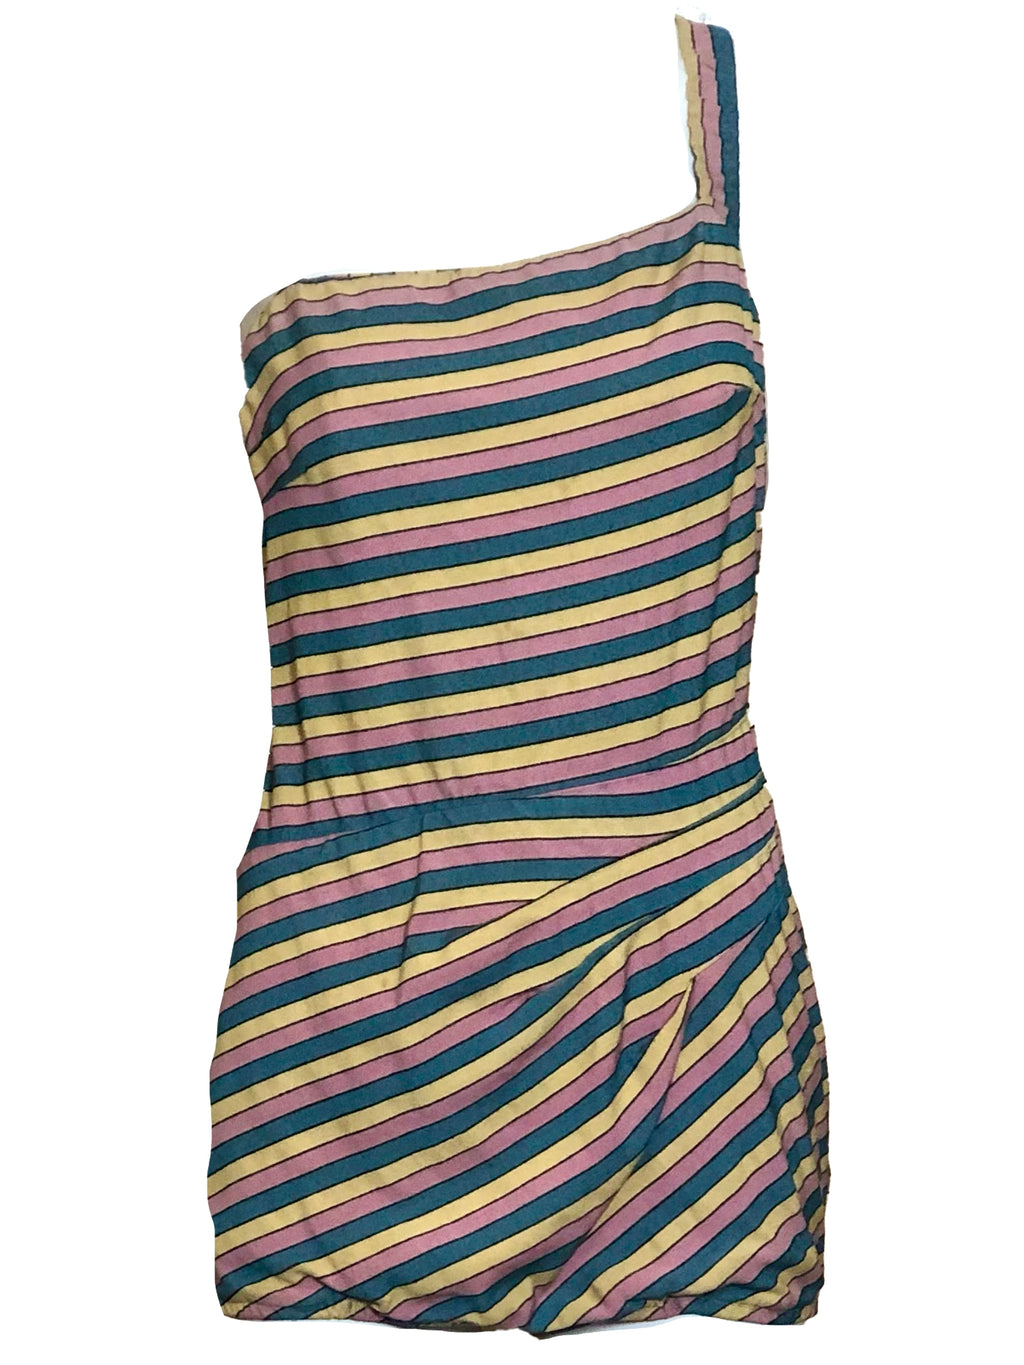 Rose Marie Reid 50s One Shoulder Striped Swimsuit FRONT 1 of 5